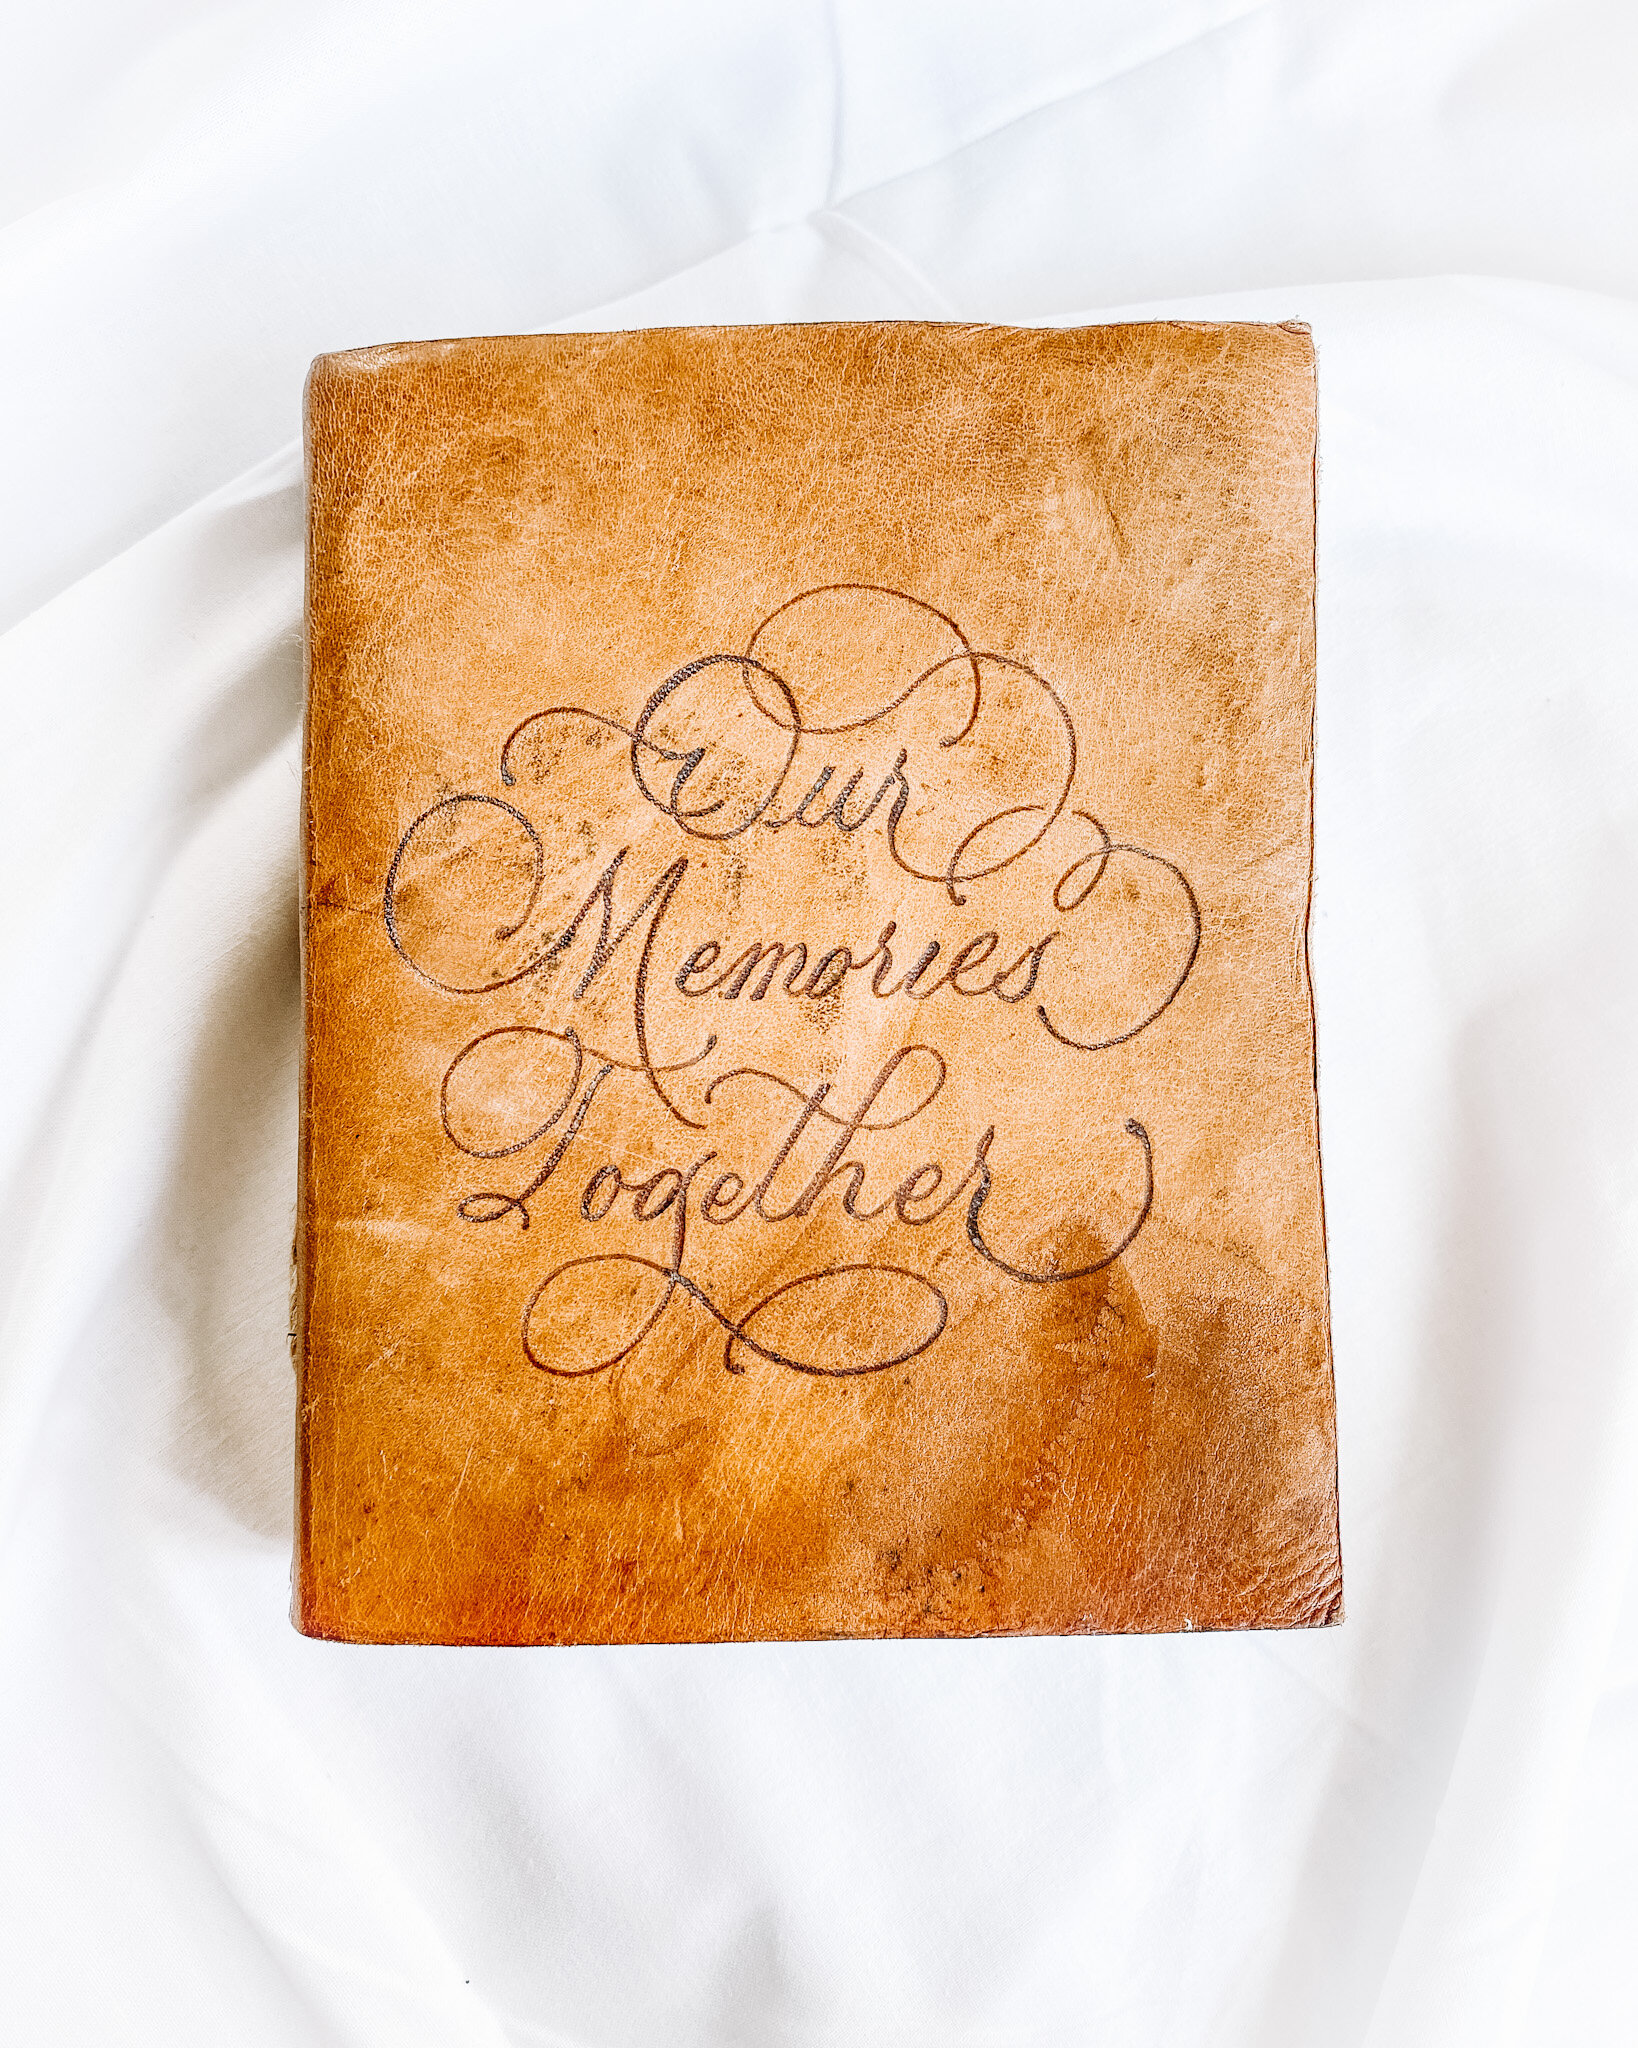 Engraved leather notebook